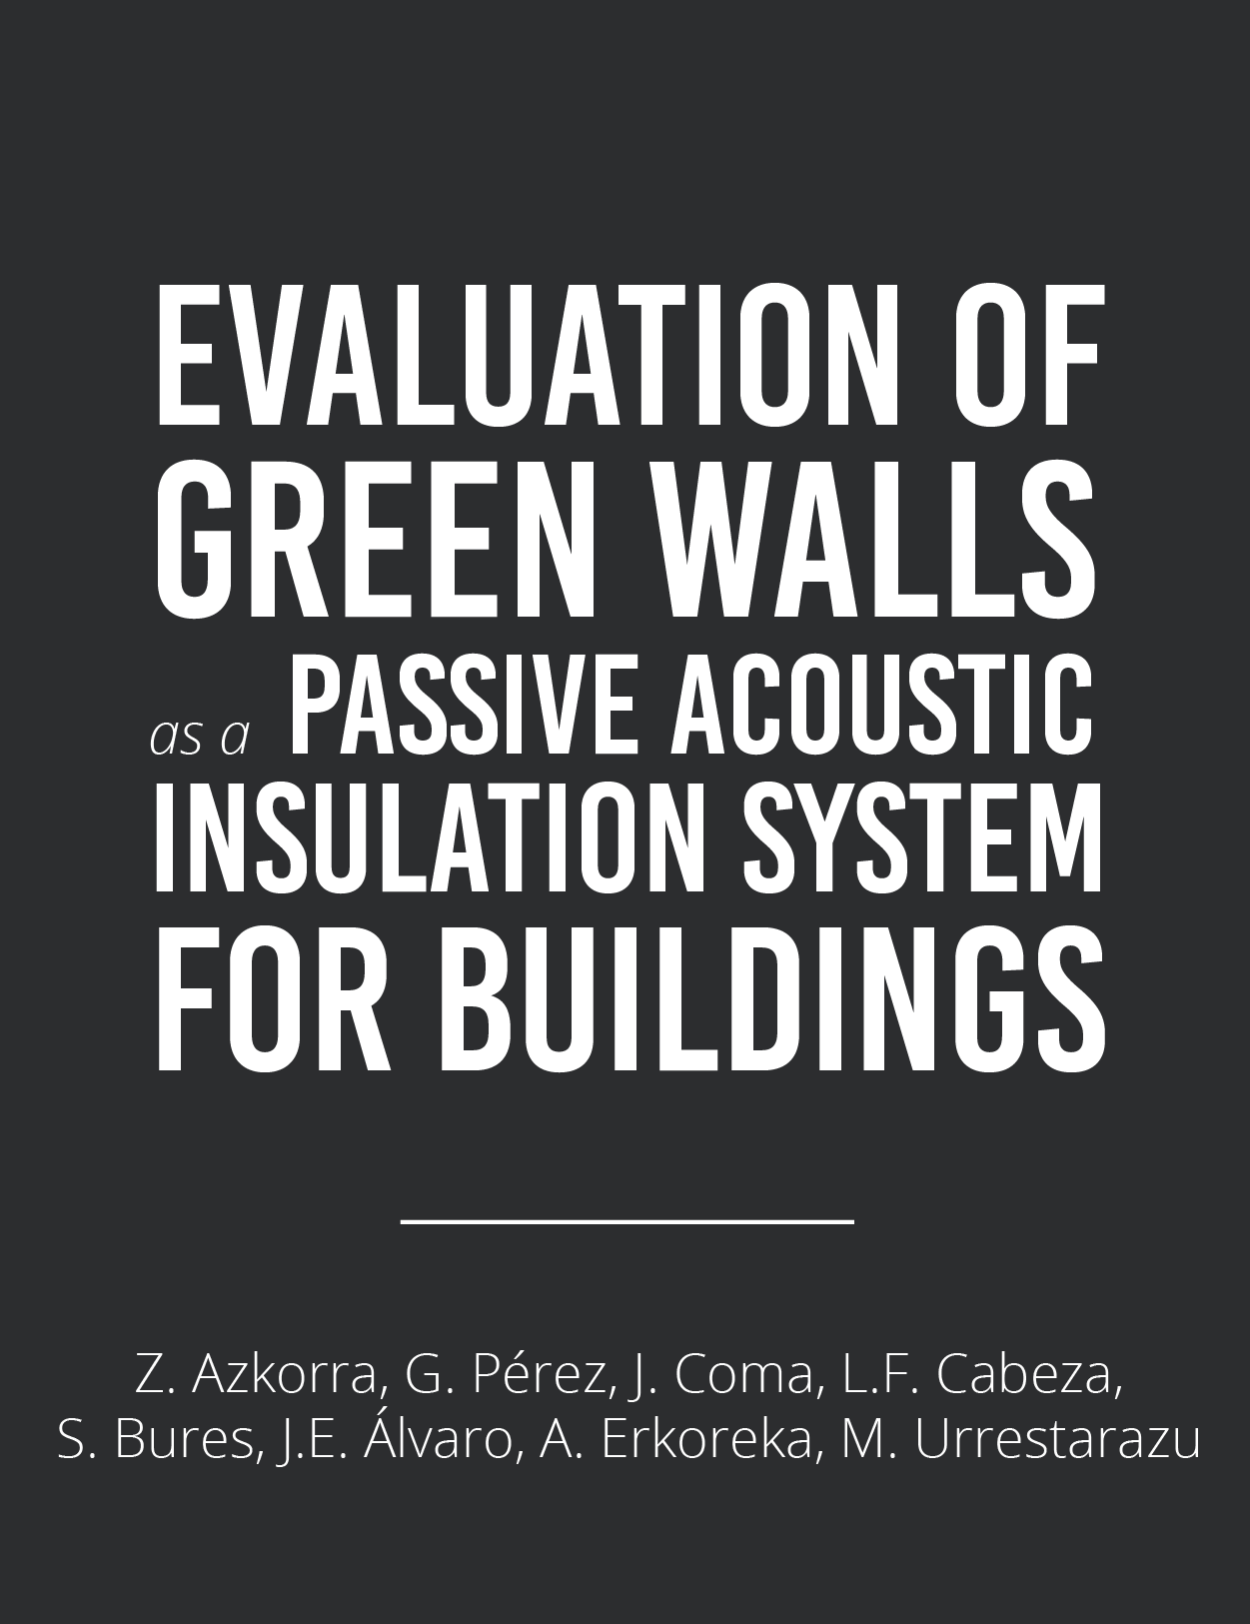 Green Walls as a Passive Acoustic Insulation SystemFeatured Image